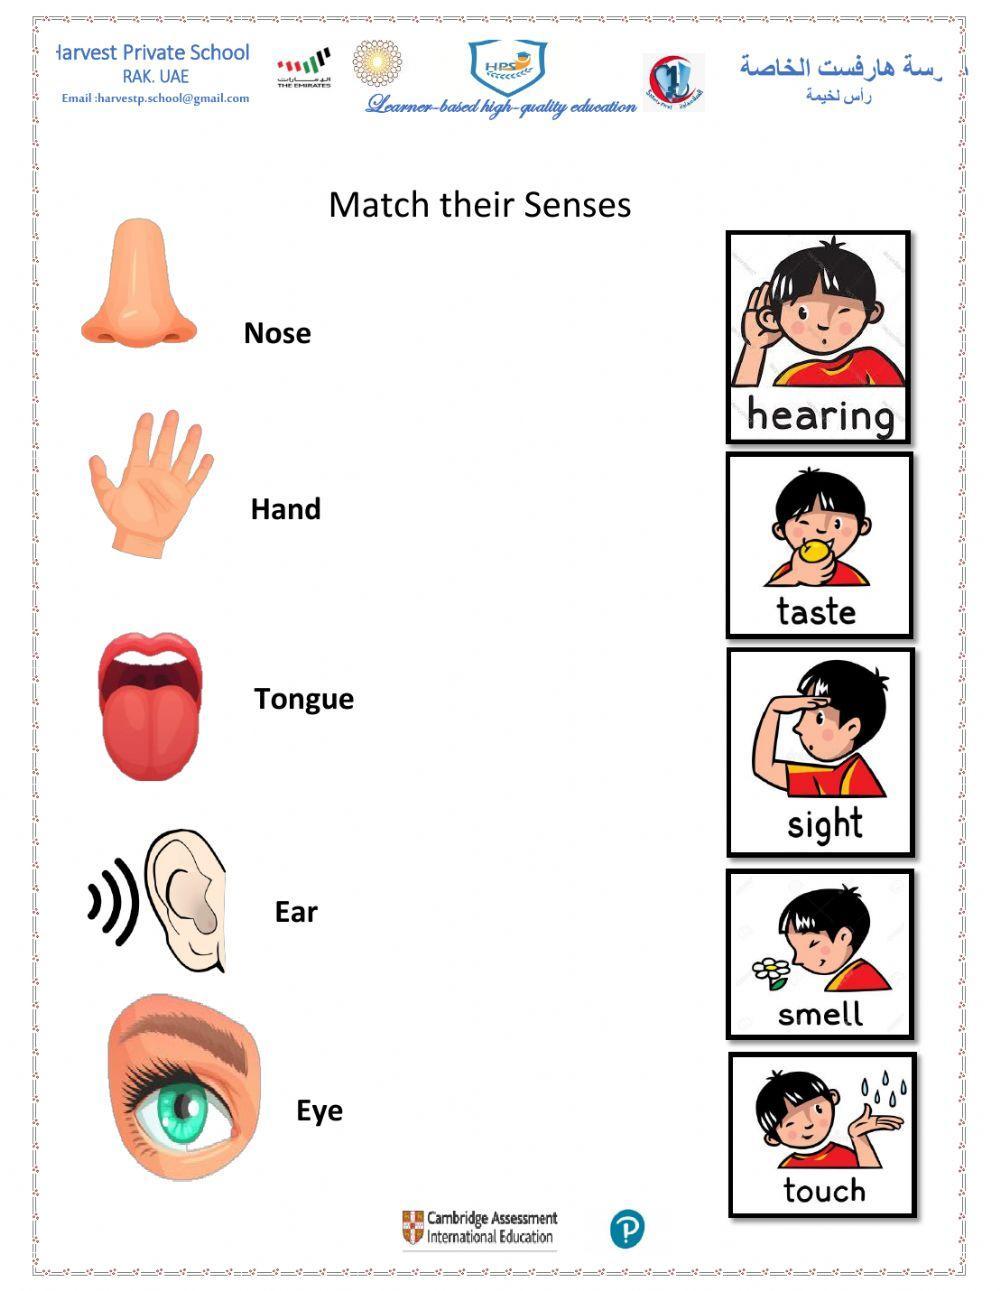 How people use the 5 senses